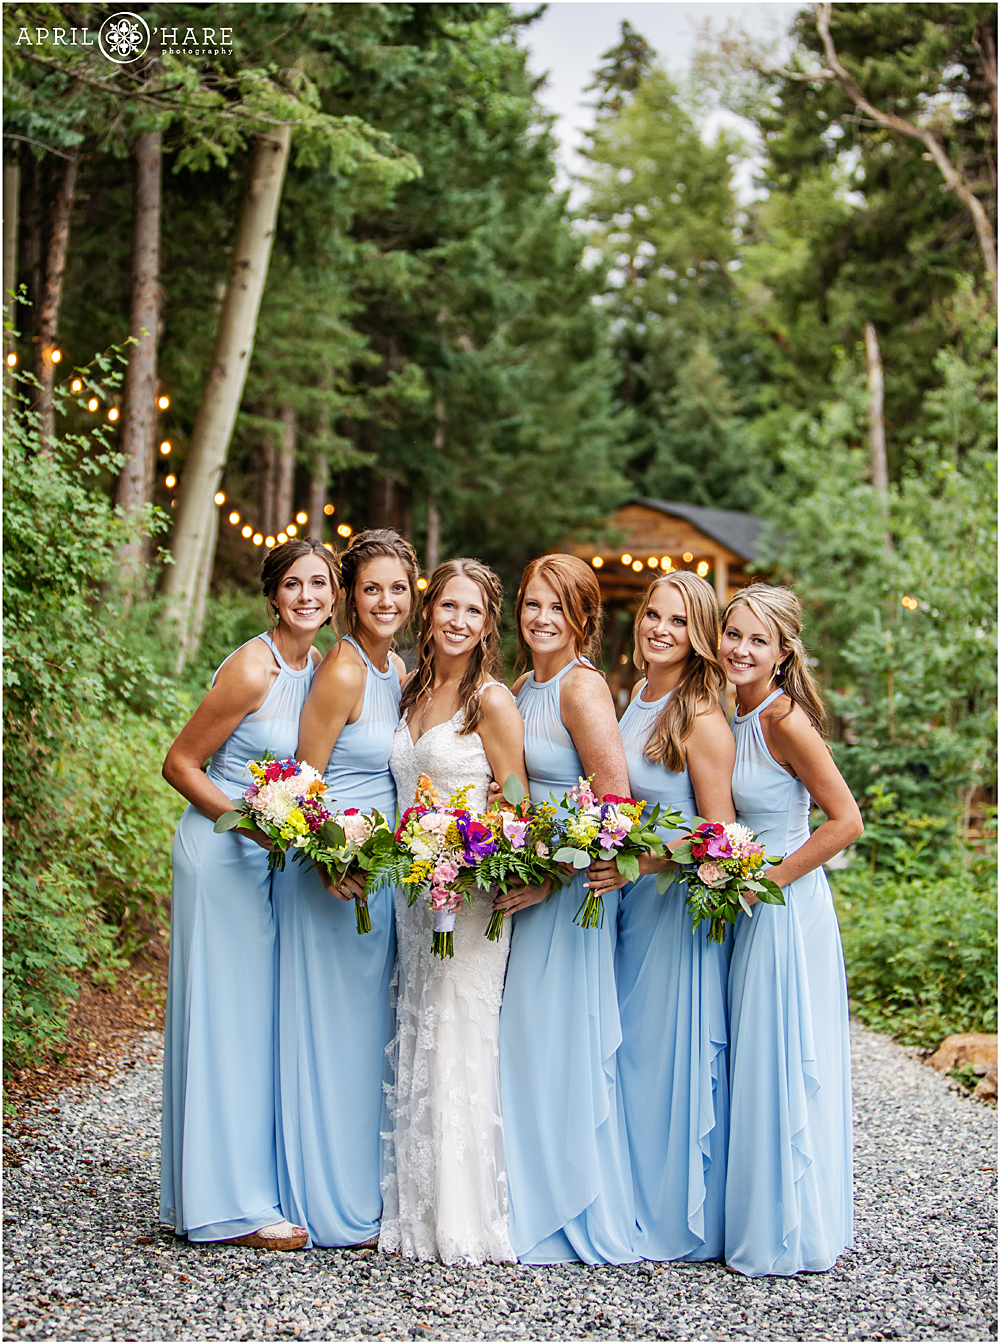 Bride with her bridesmaids in light blue dresses at Colorado mountain wedding